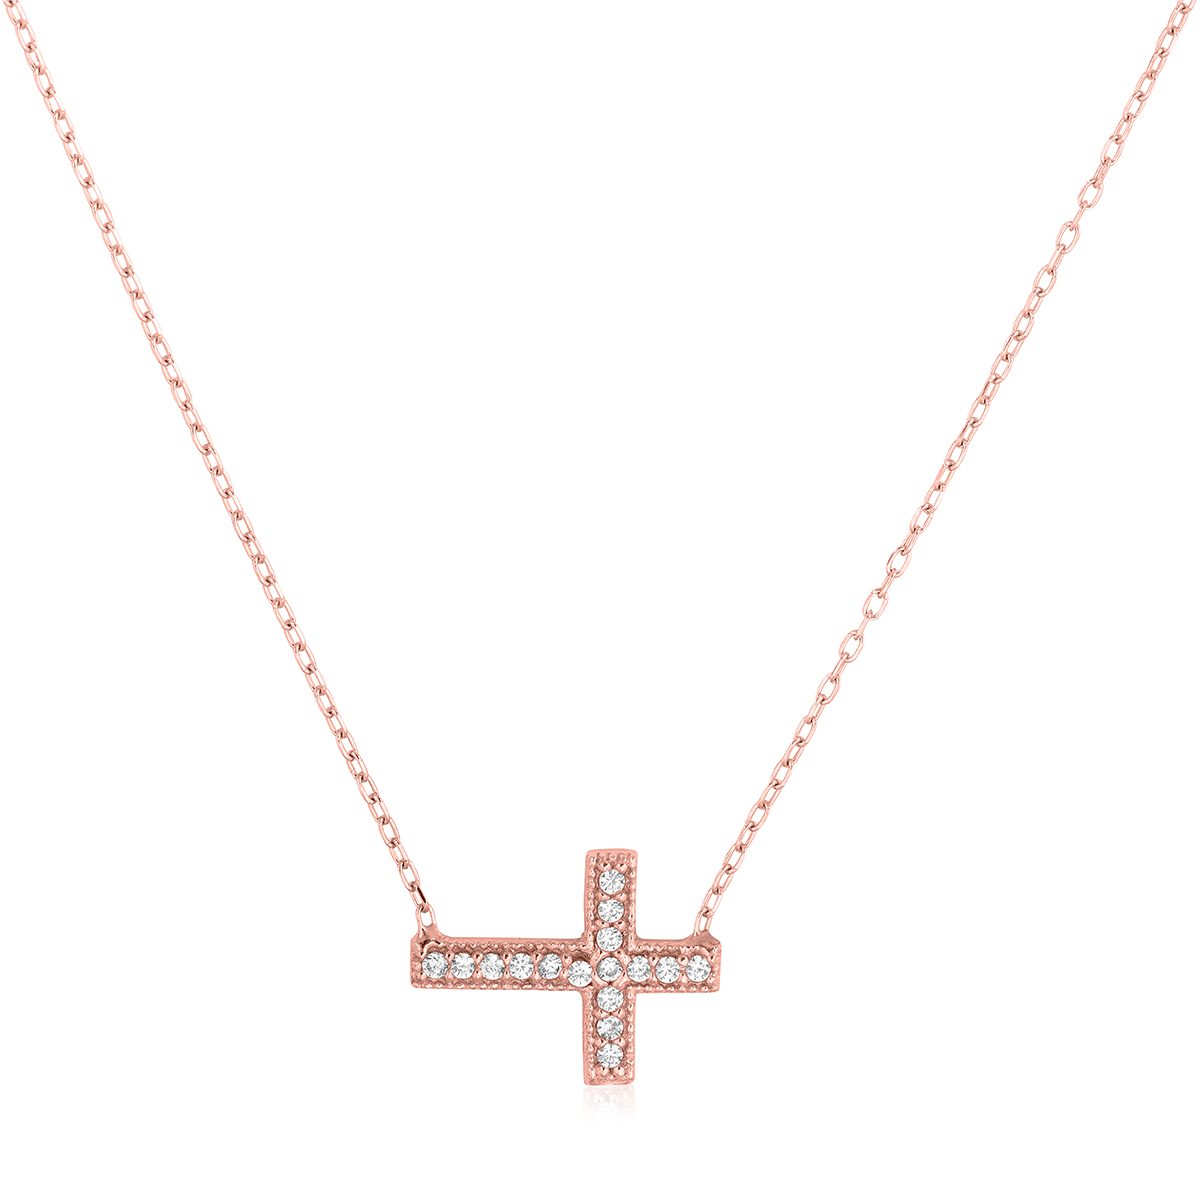 Real 14K Rose Gold Large Sideways Curved Cross Necklace; 19 inch; Lobster  Clasp | eBay